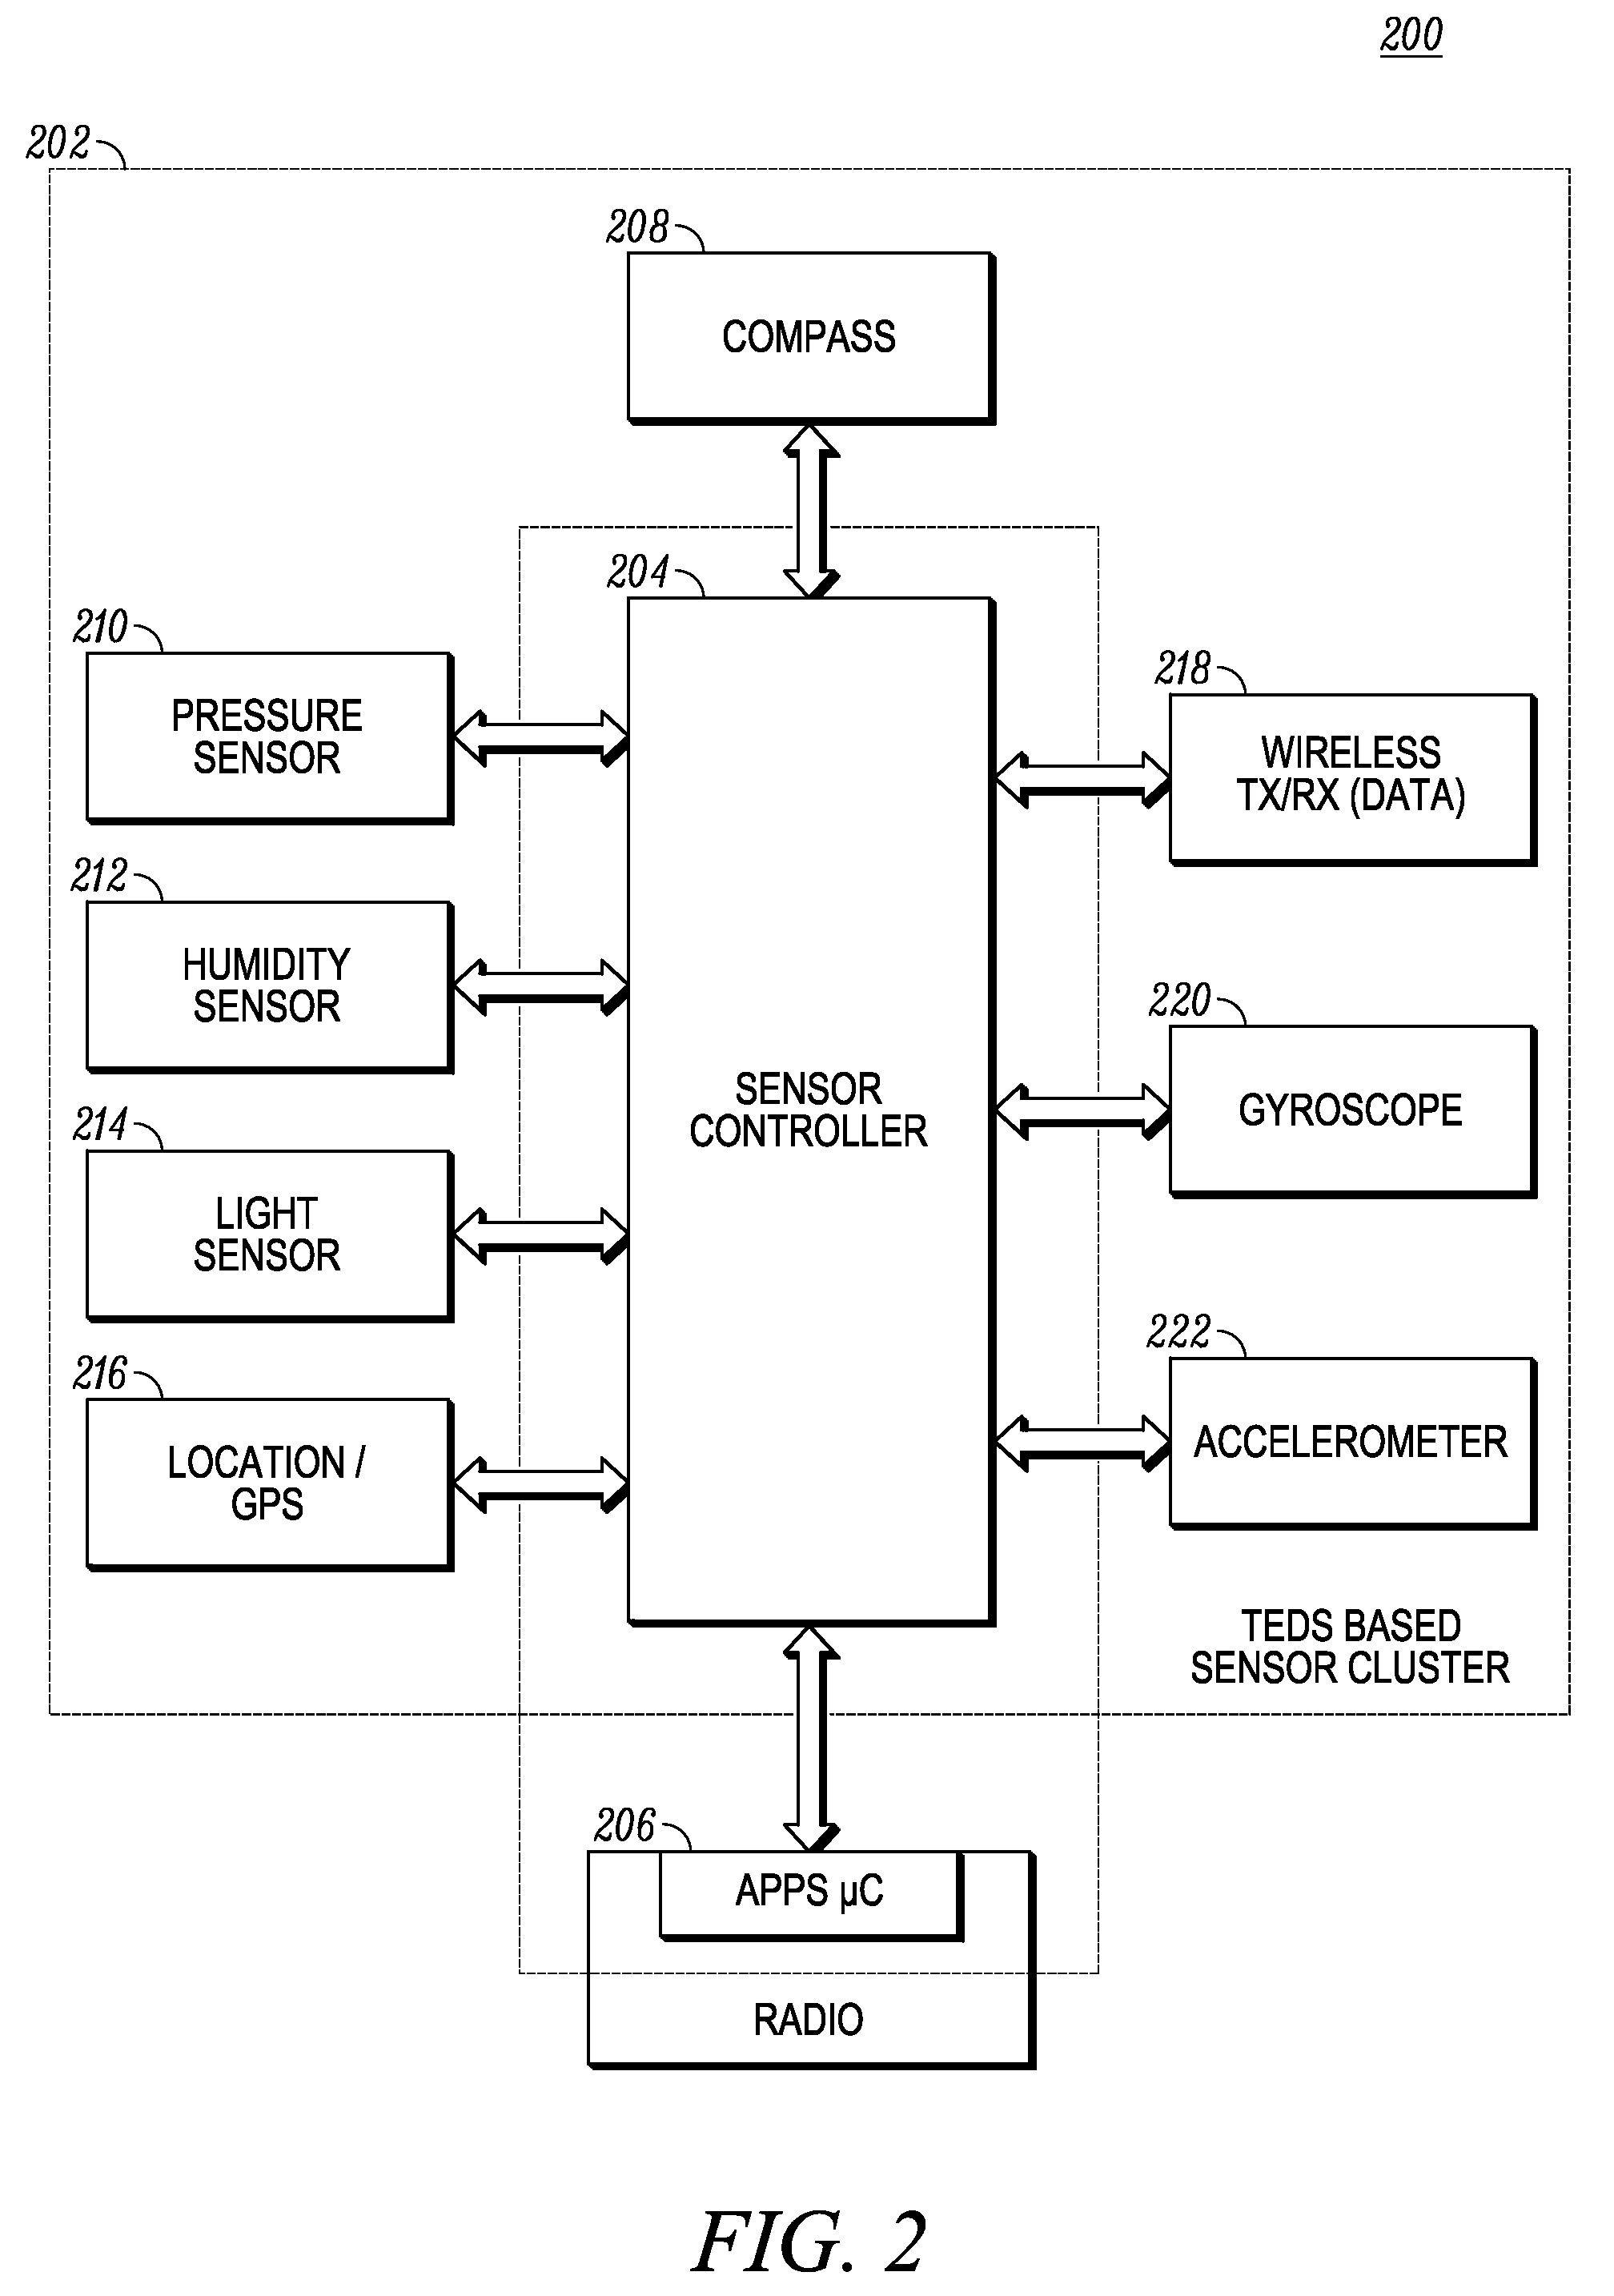 Method of sensor cluster processing for a communication device